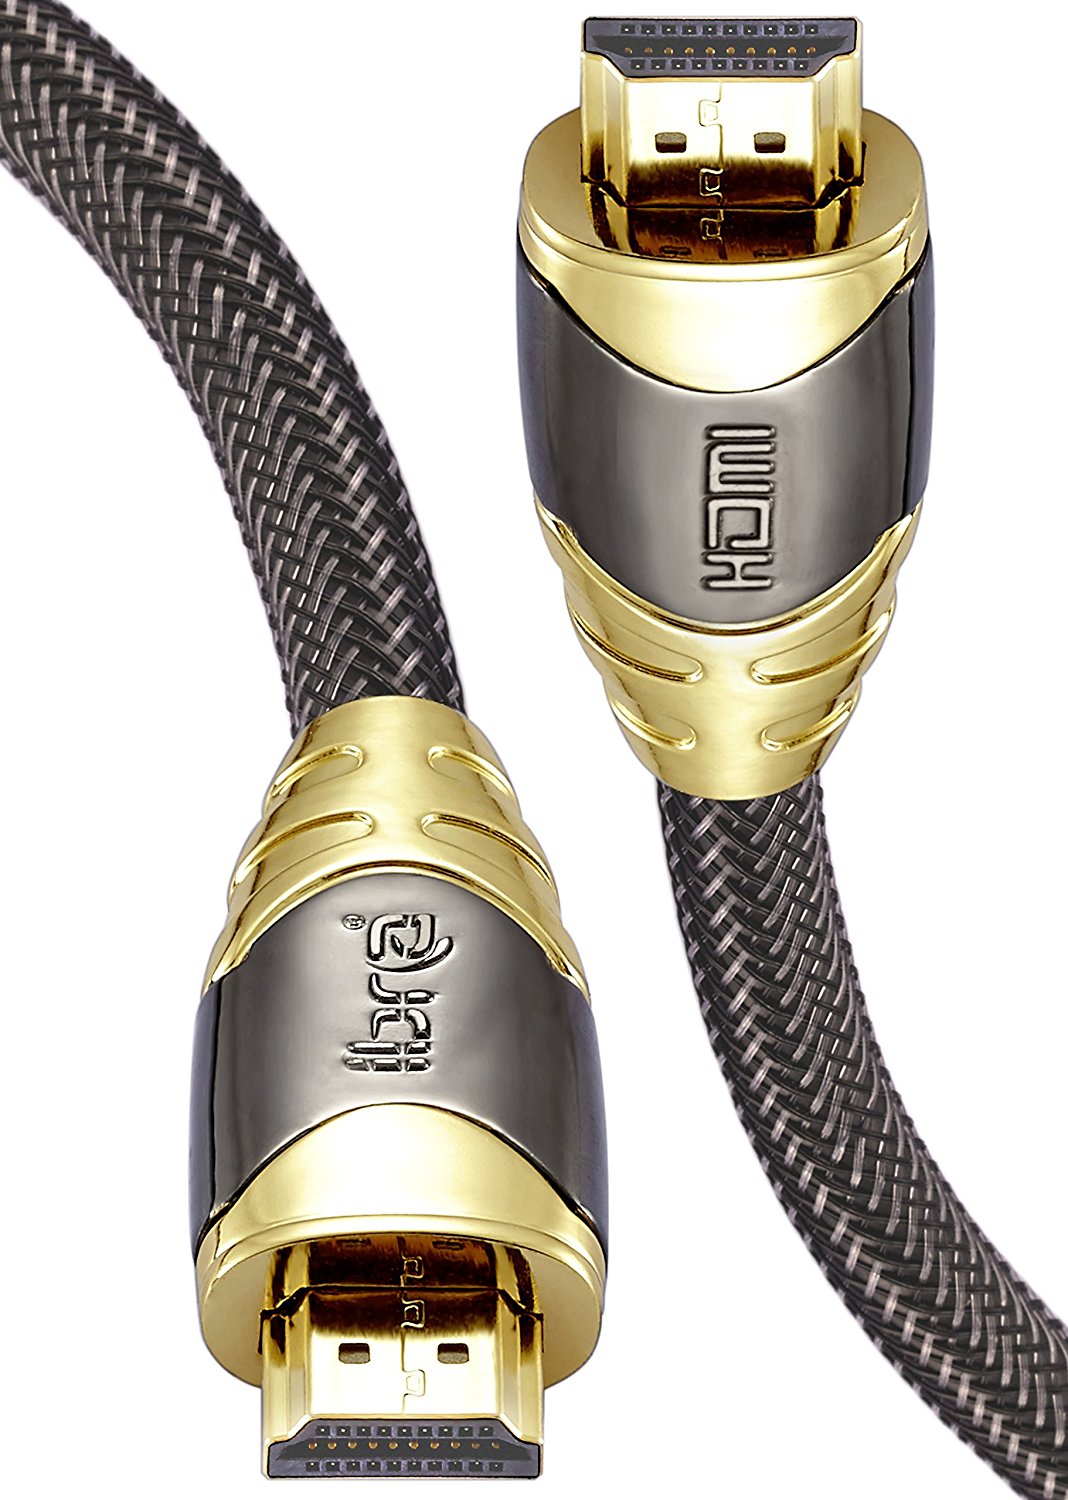 HDMI Cable 1.5M - HDMI 2.0 (4K@60Hz) Ready - 28AWG Braided Cord - 18Gbps -Gold Plated Connectors - Ethernet,ARC - Video 4K 2160p HD 1080p 3D Xbox PlayStation PS3 PS4 PC Apple TV – IBRA LUXURY